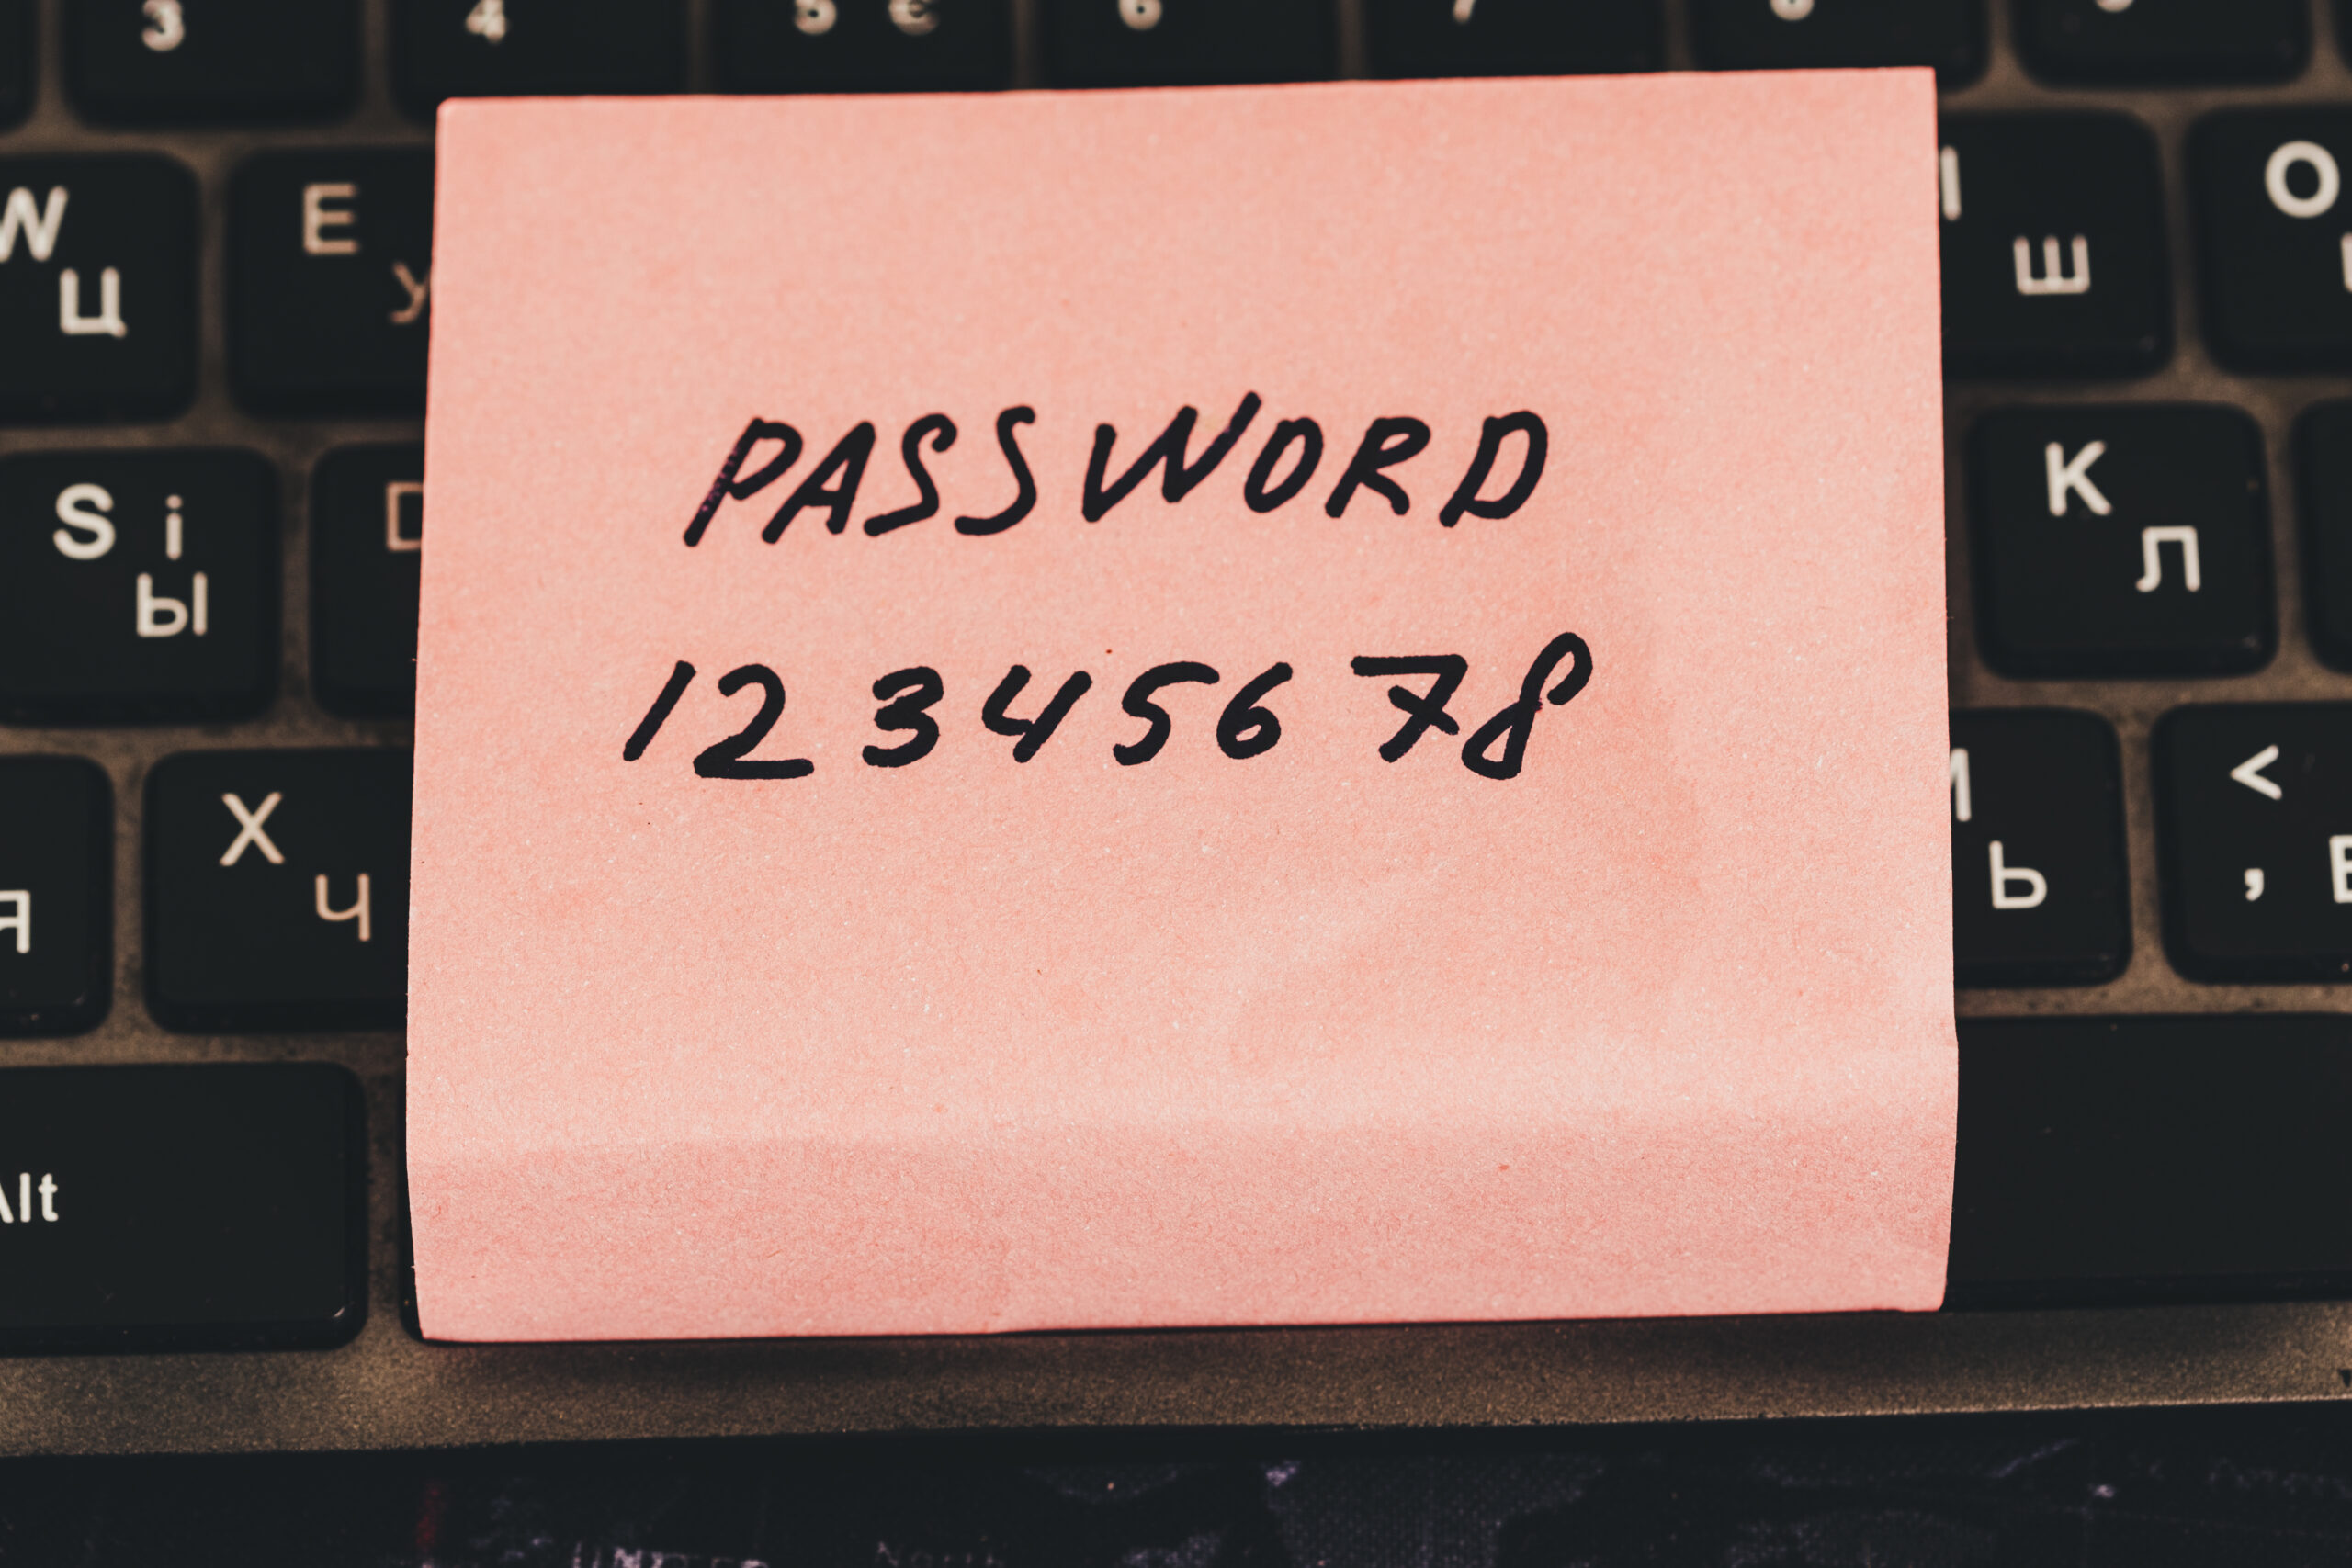 image of a post it note on a keyboard saying "password 12345678"